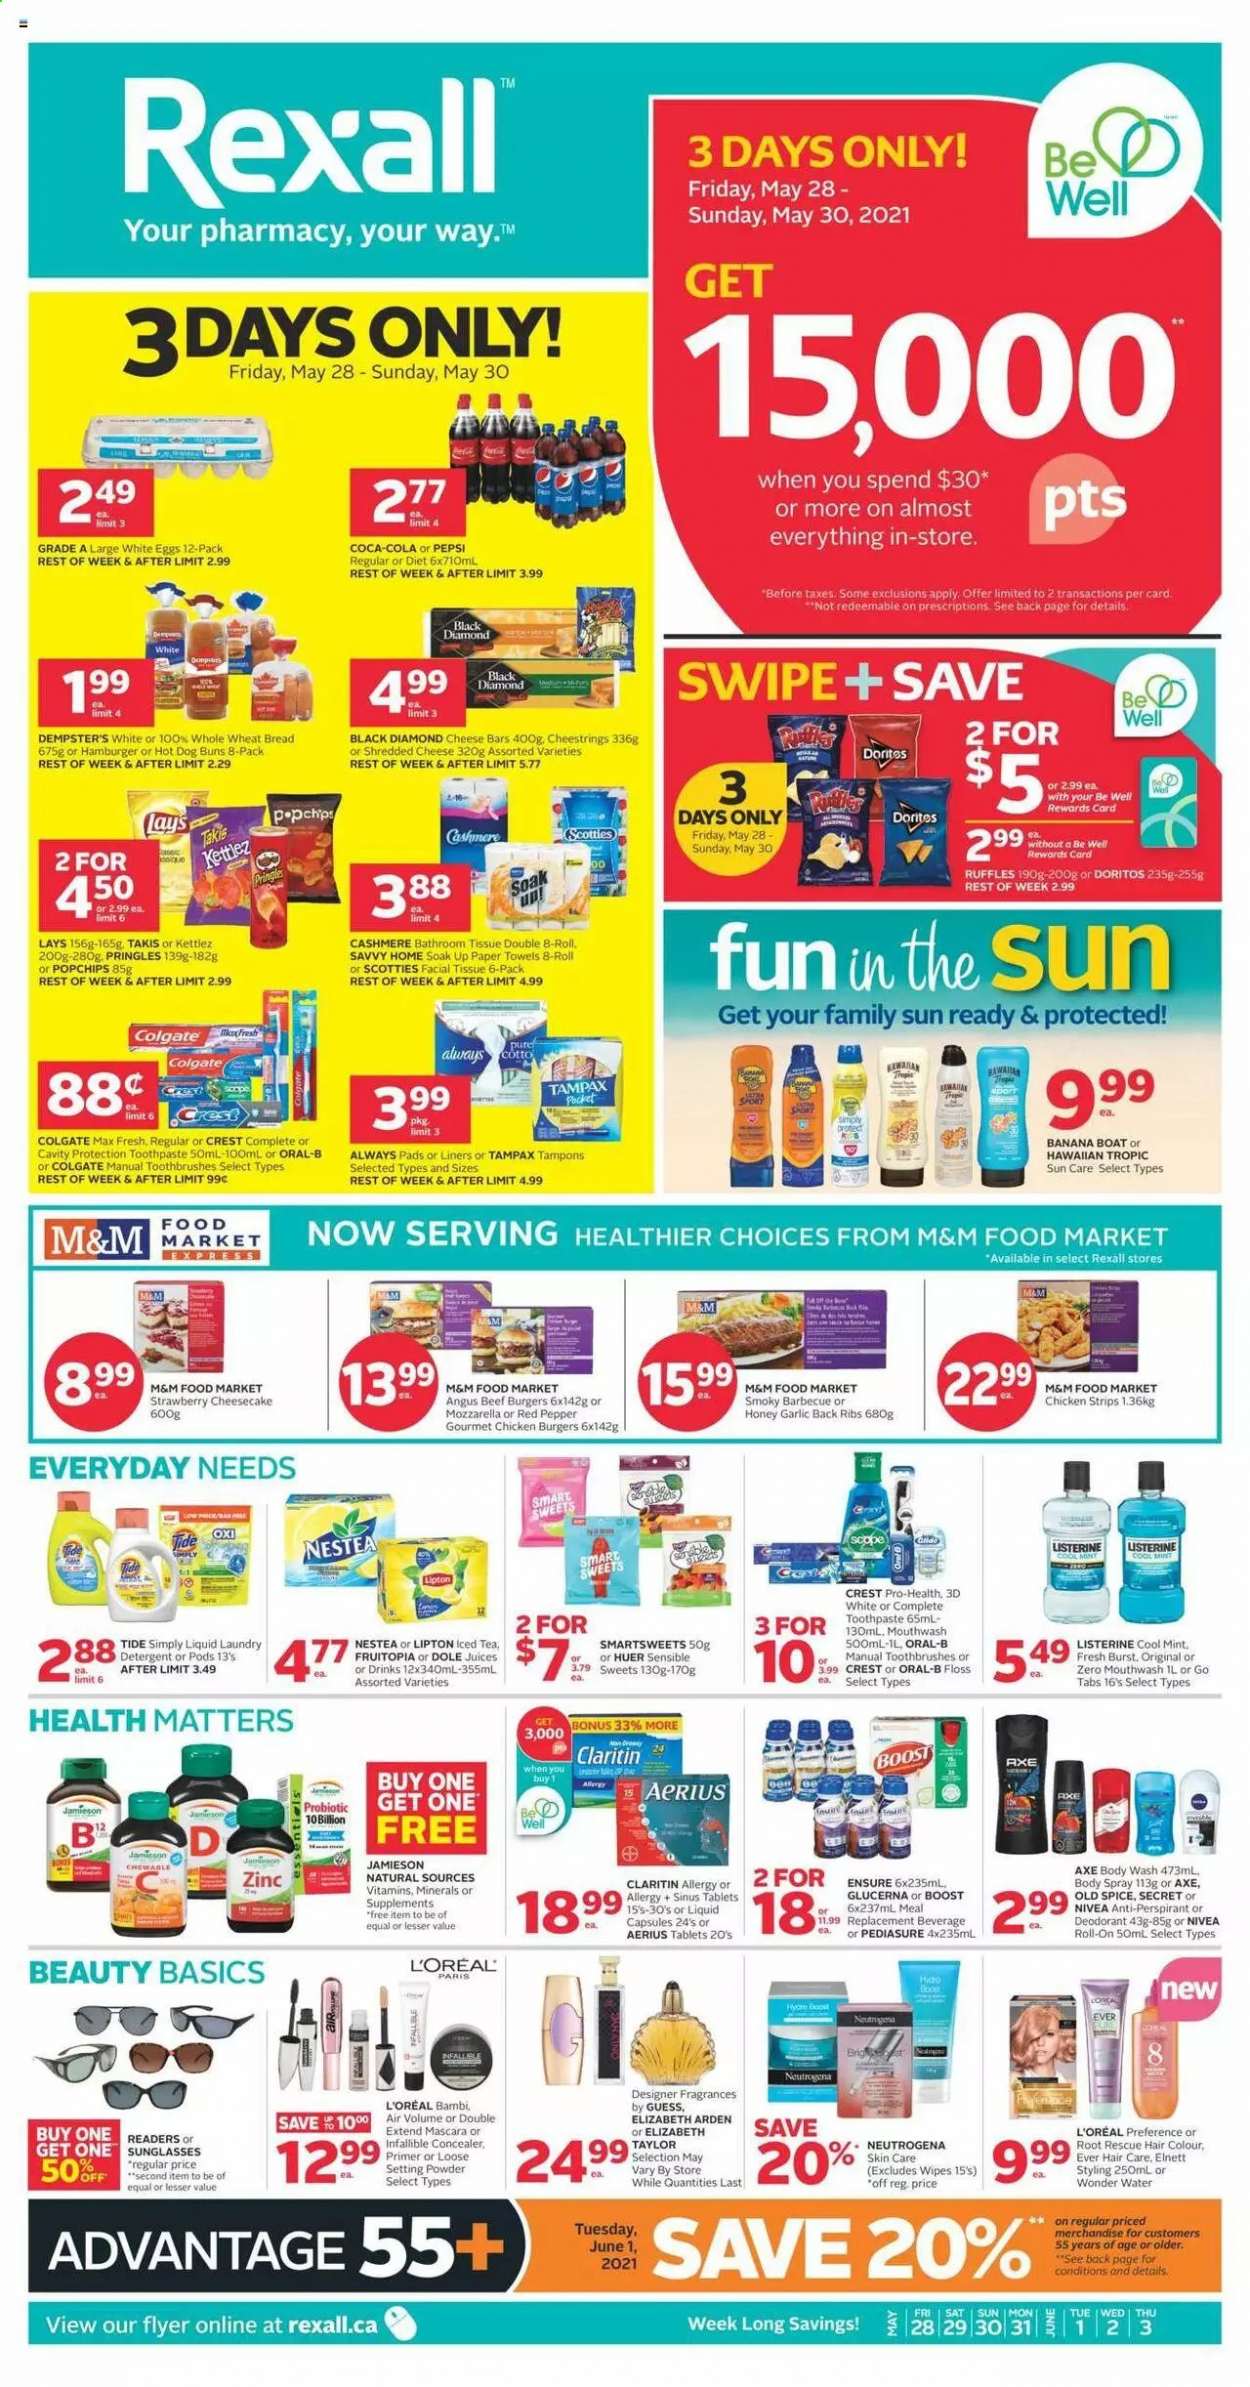 thumbnail - Rexall Flyer - May 28, 2021 - June 03, 2021 - Sales products - Doritos, Pringles, Lay’s, Ruffles, garlic, Dole, spice, Coca-Cola, Pepsi, juice, ice tea, Boost, wipes, bath tissue, kitchen towels, paper towels, Tide, laundry detergent, body wash, toothpaste, mouthwash, Crest, Always pads, sanitary pads, tampons, L’Oréal, hair color, body spray, anti-perspirant, roll-on, Guess, corrector, face powder, Glucerna, zinc, Listerine, mascara, Neutrogena, Tampax, Nivea, Old Spice, Oral-B, M&M's, deodorant. Page 1.